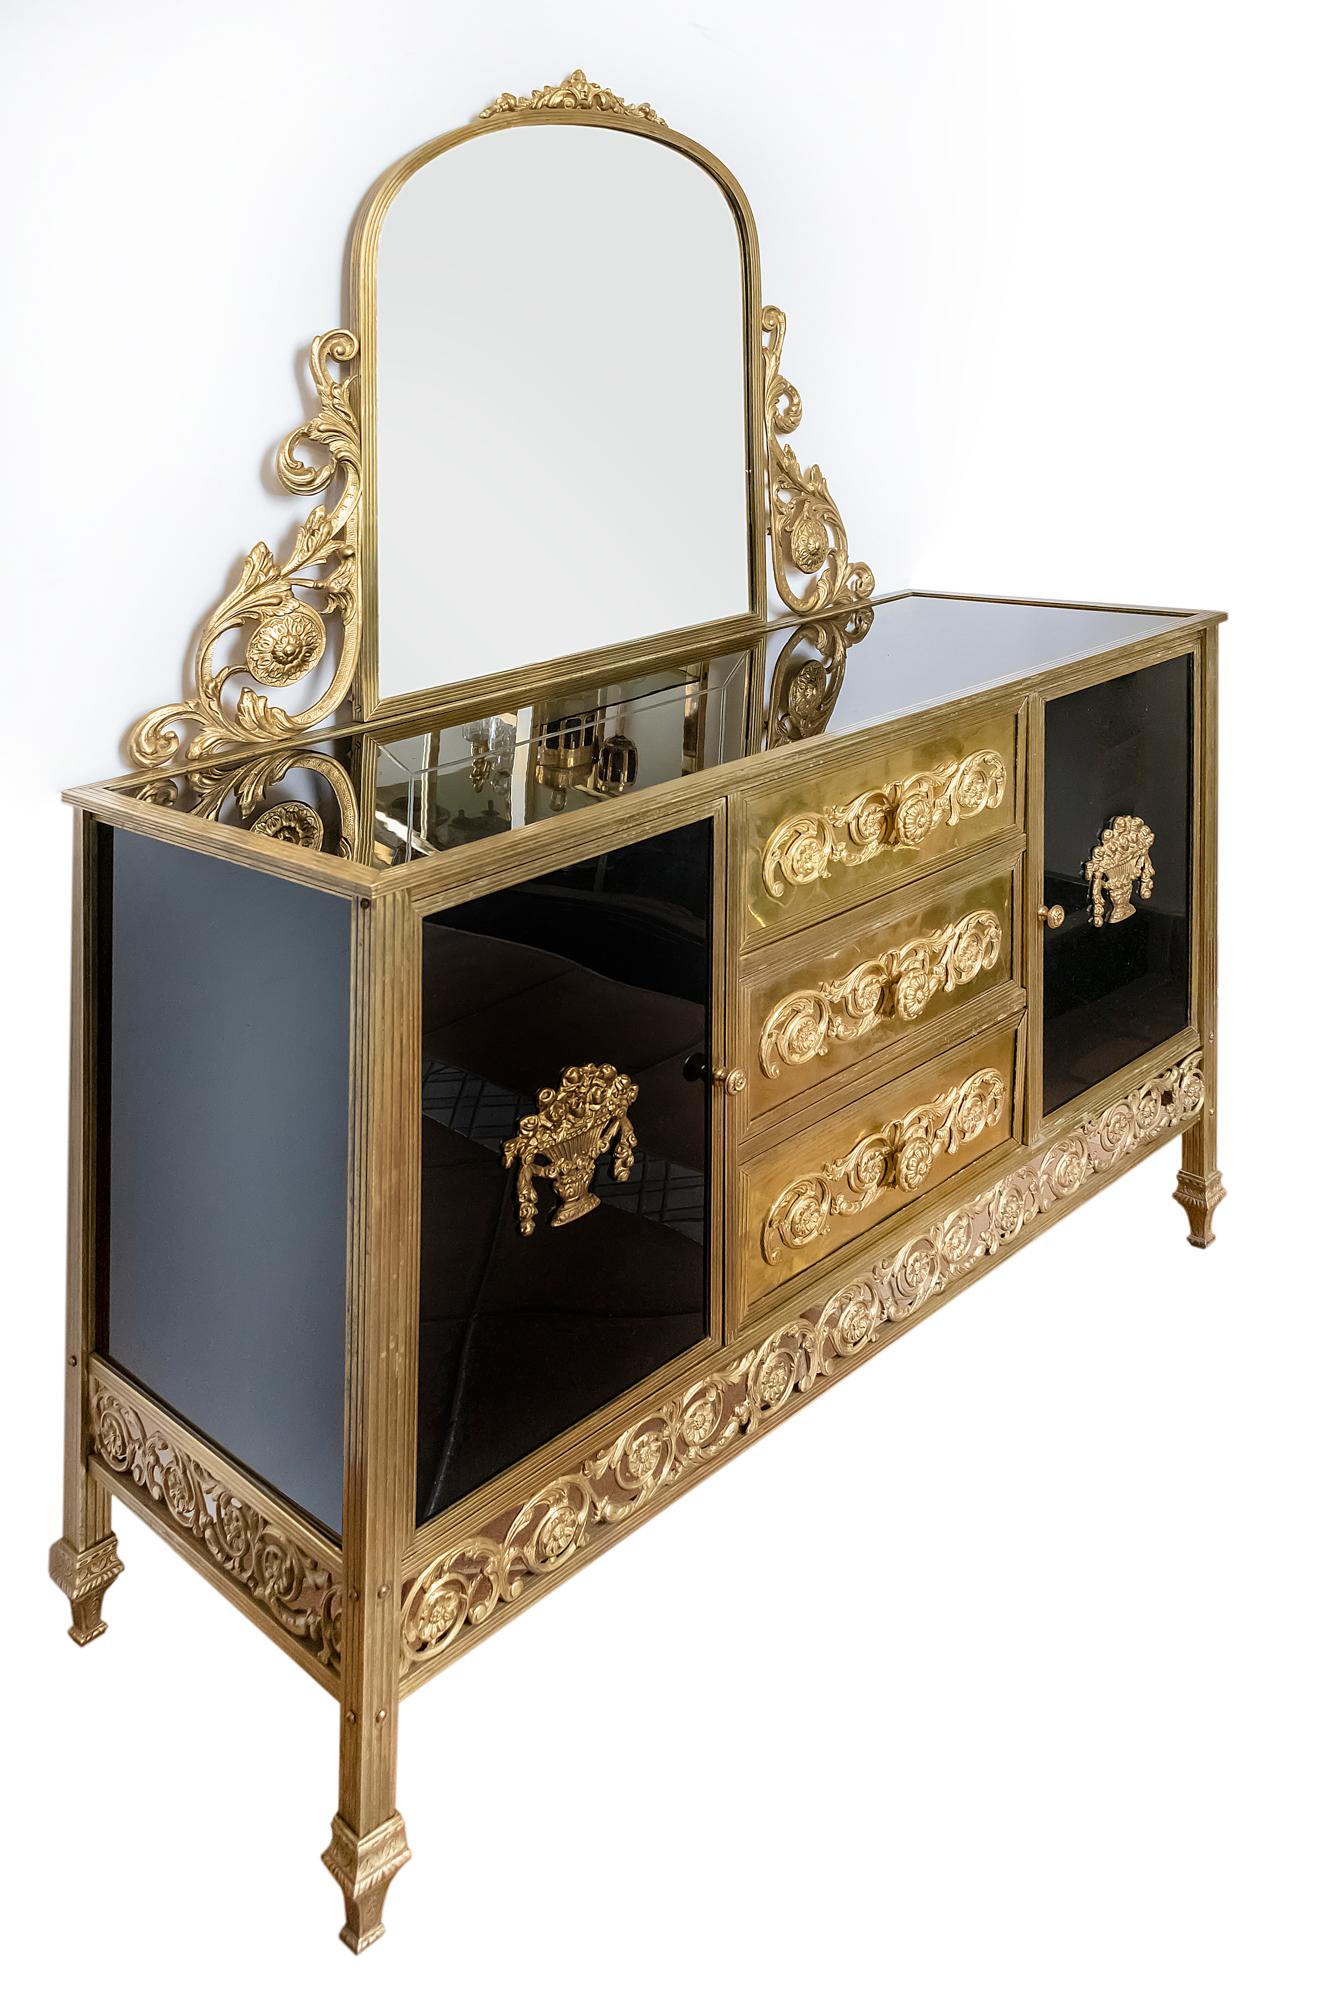 Antique French Napoleon III style commode dresser with mirror, circa 1900.
All the construction and legs are made in bronze, sides and front doors with black color glass, drawers are decorated with bronze details.
The mirror is etched with floral